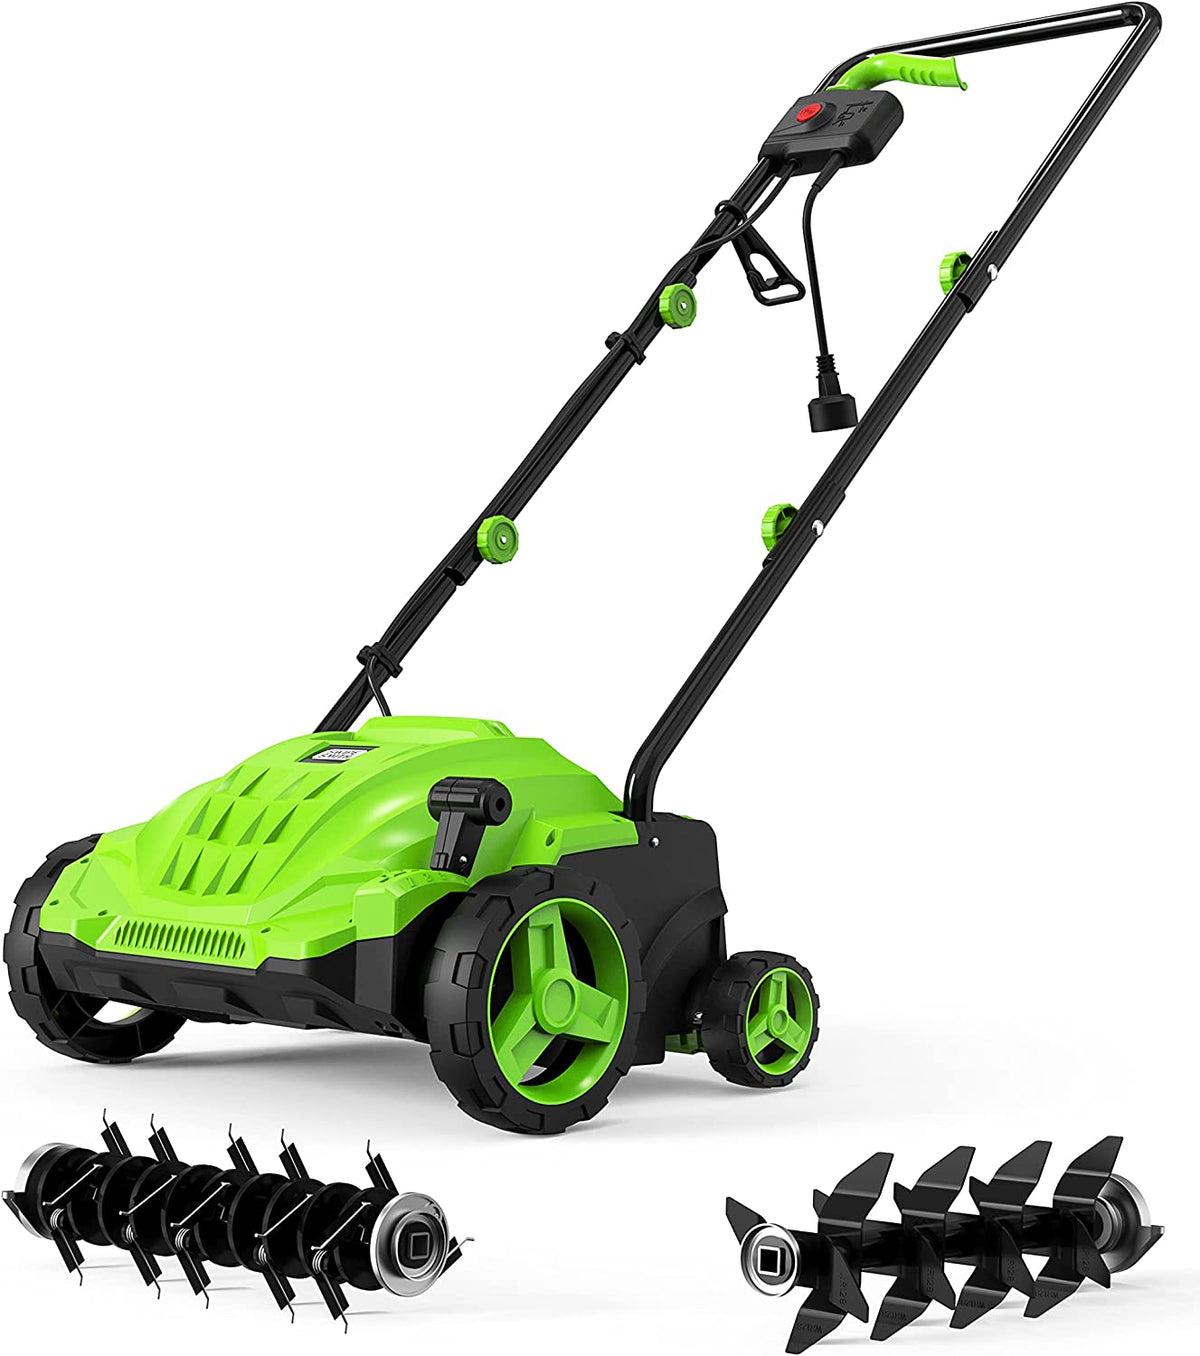 SWIPESMITH 13-Inch 12 Amp Electric Dethatcher Scarifier, 2-in-1 Lawn Dethatcher with Two Safety Switches, 4-Position Depth Adjustment